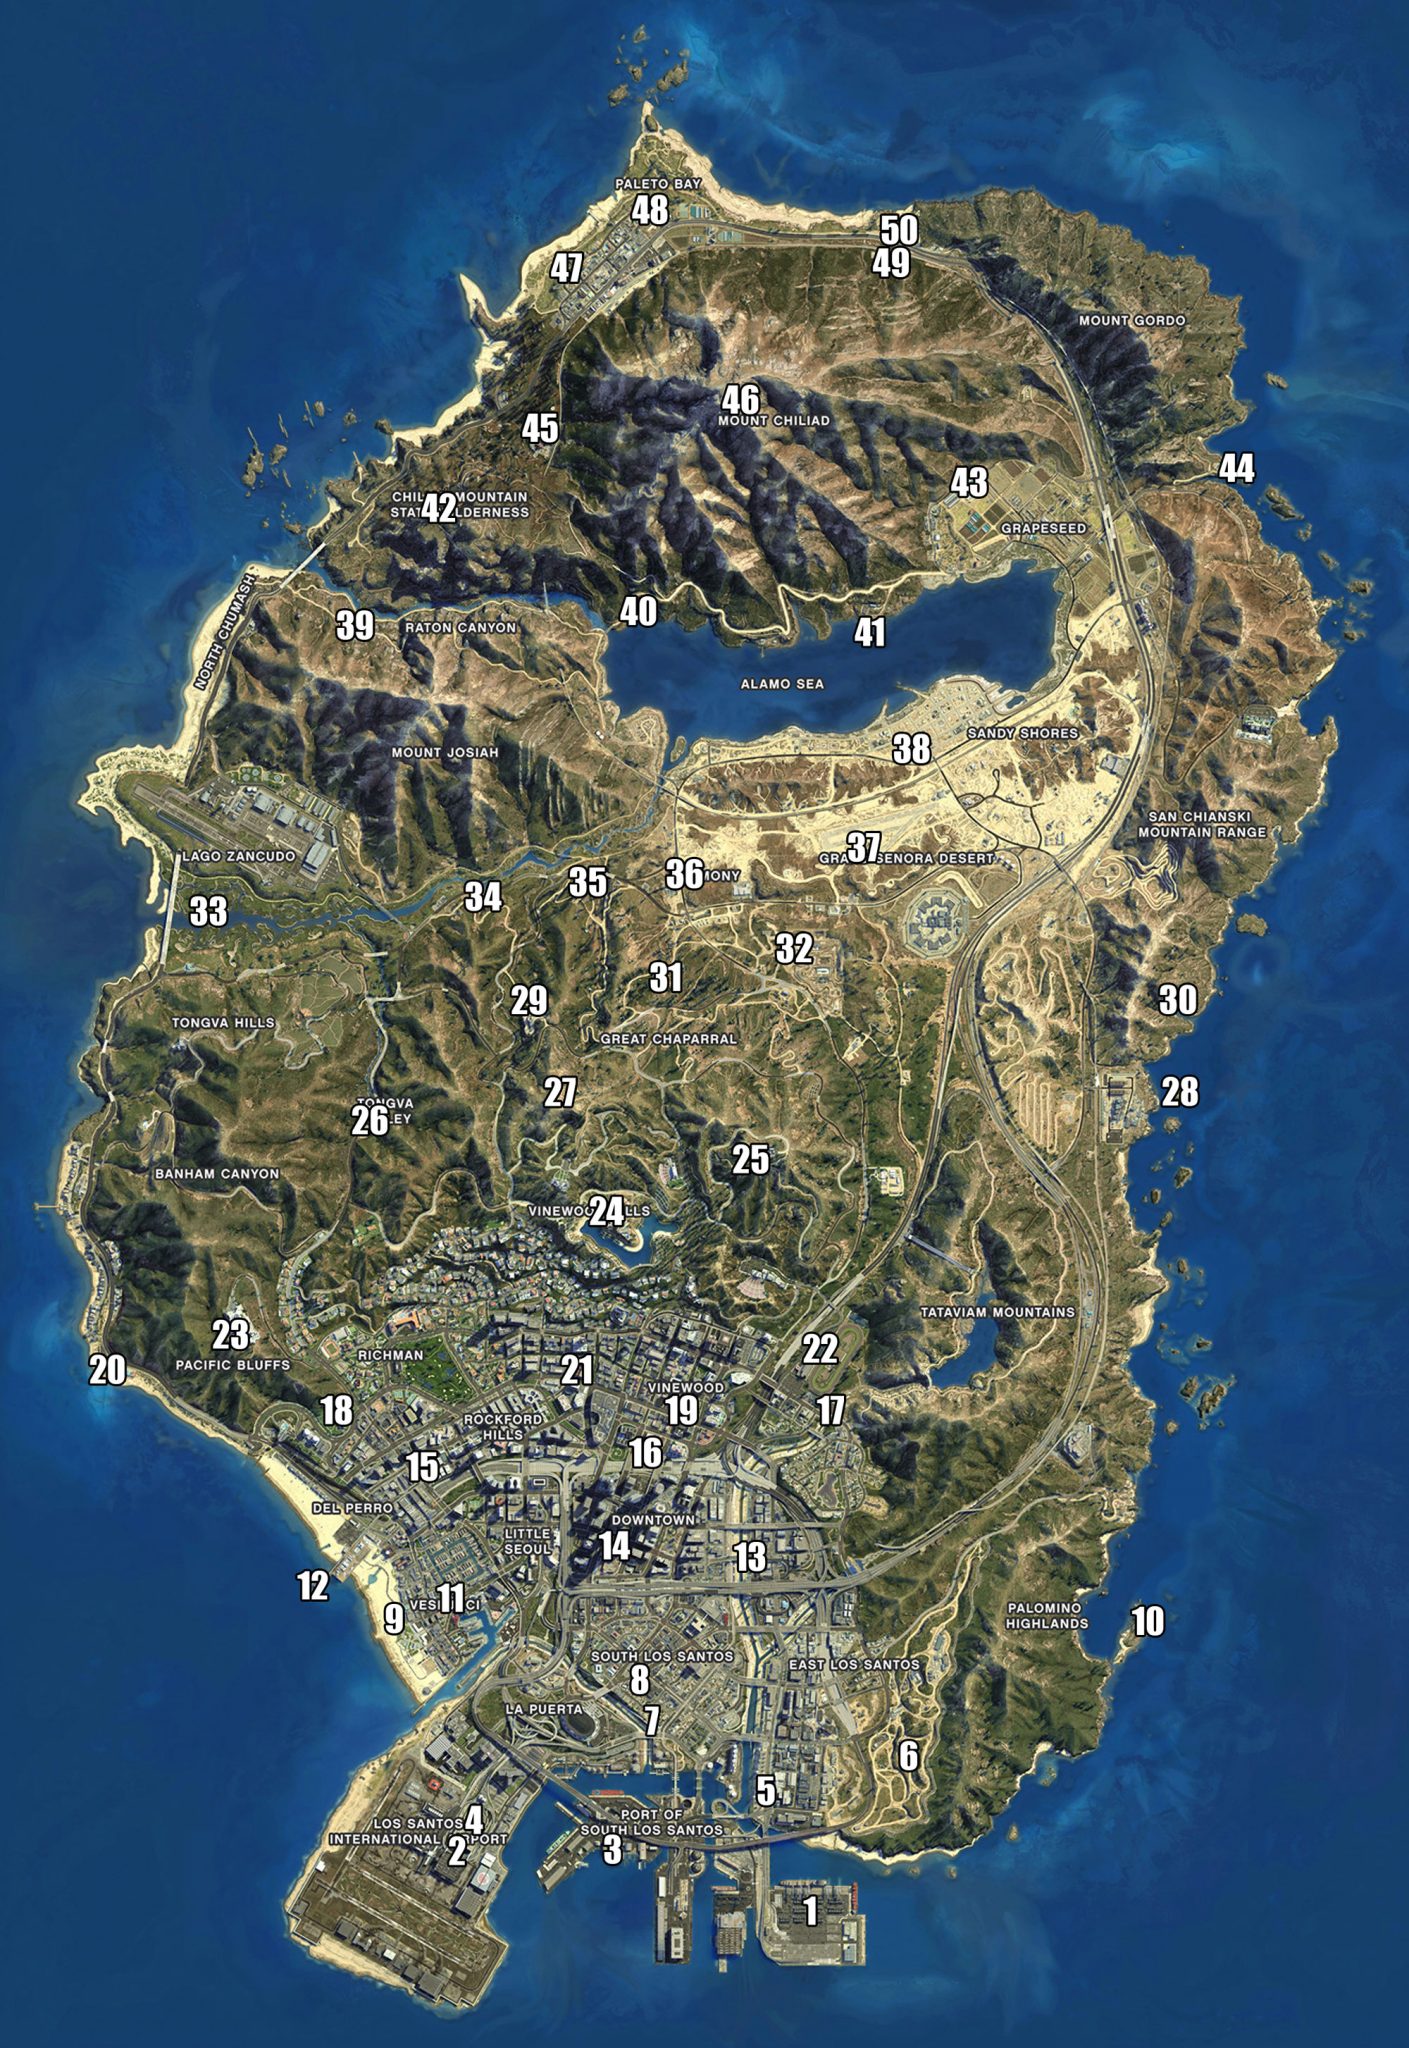 gta-v-5-letter-scraps-location-map-your-games-tracker